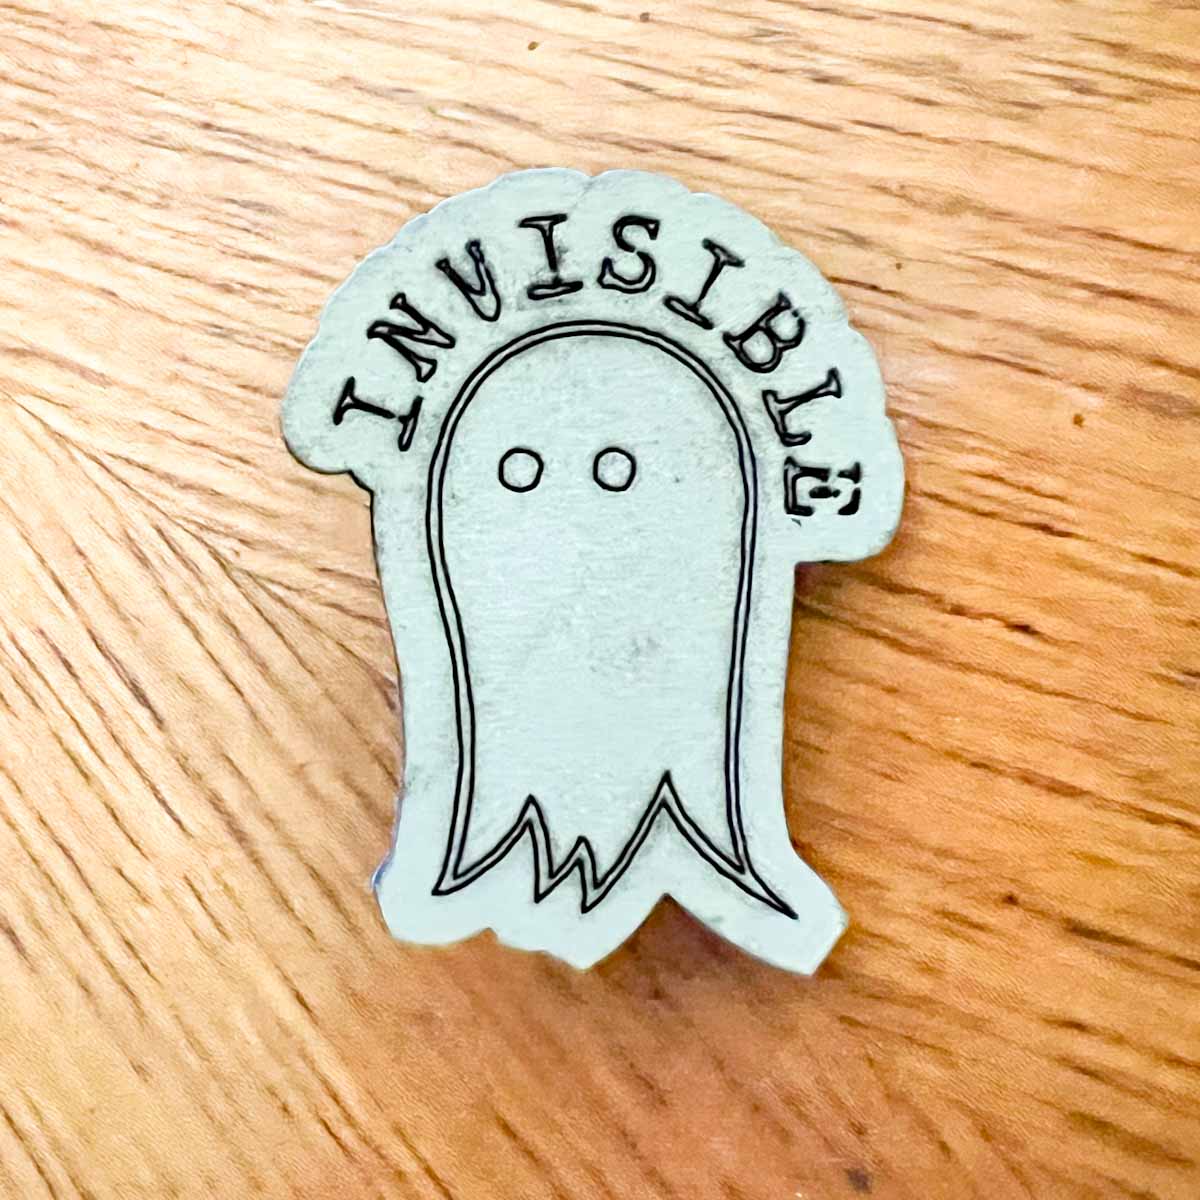 Invisible Ghost Pin Cute Paranormal; Melasdesign Handmade Darkness; pins; pinback buttons; ghost hunter gift; fashion accessory; funny ghost; invisible; marble